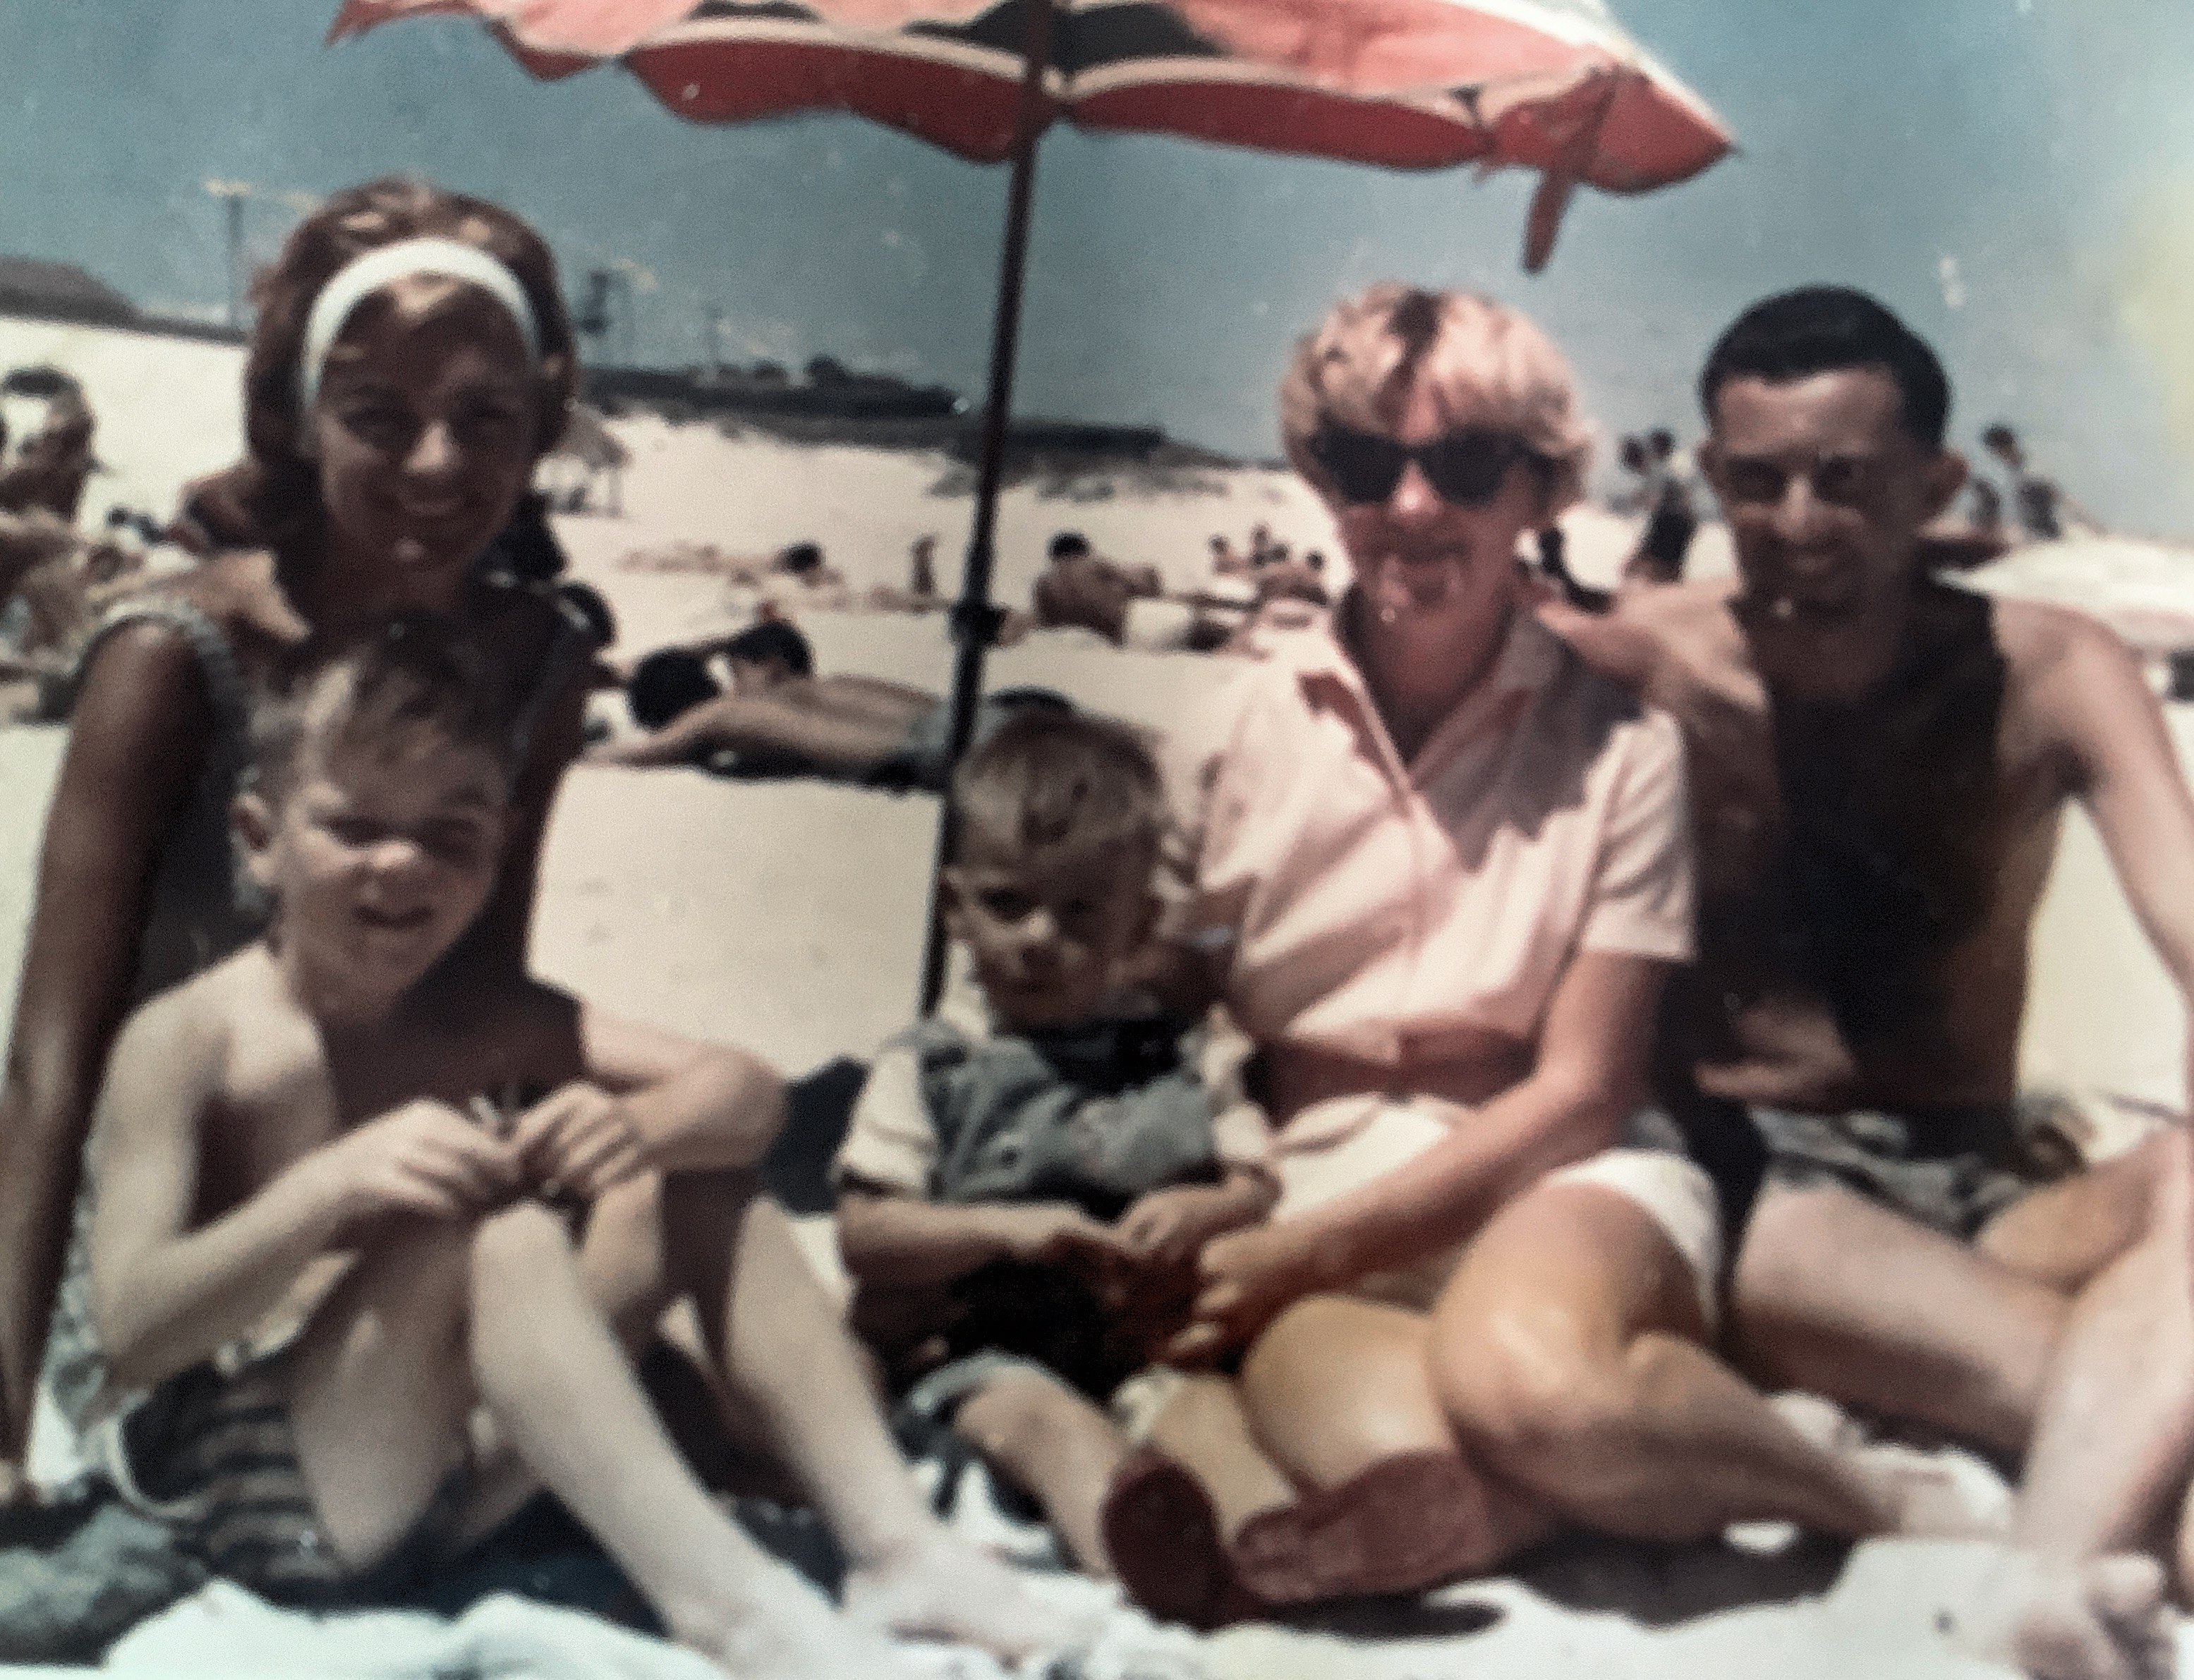 Meeting up with school friend Elaine Gemmell at beach in Perth 1962.